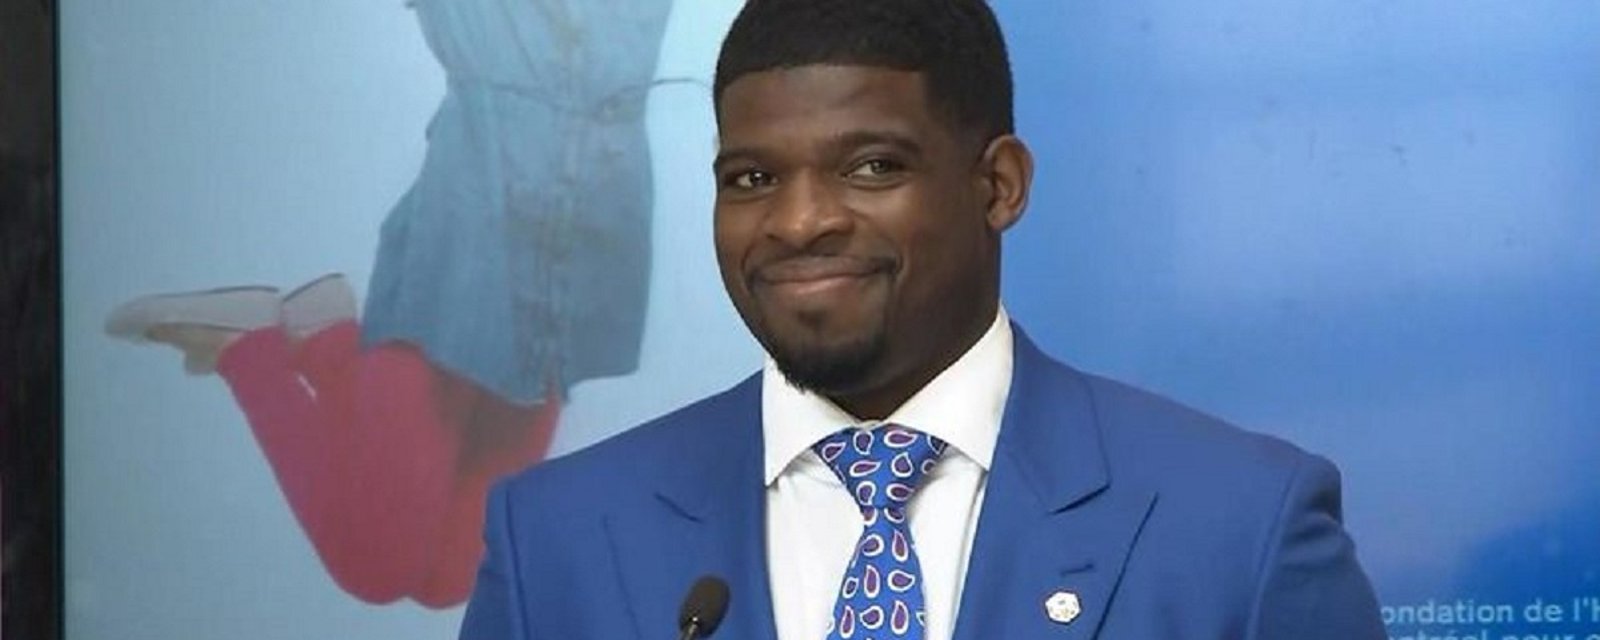 Breaking: P.K. Subban makes a huge promise to fans in Montreal!